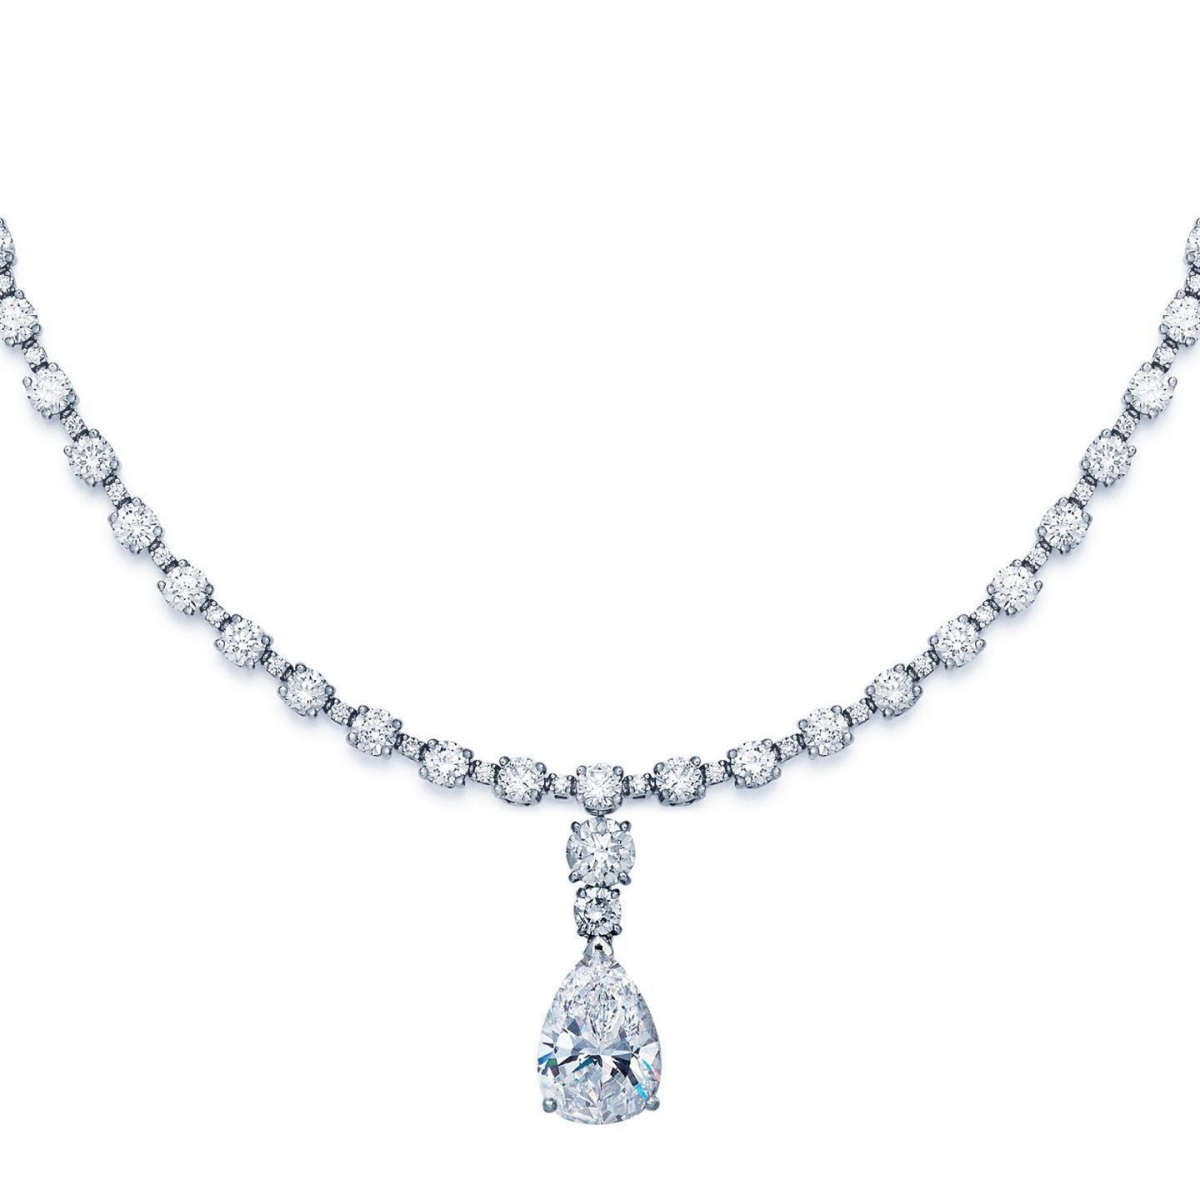 27483 White Gold Womens Jewelry Pear& Round Cut Diamond Pendant Necklace